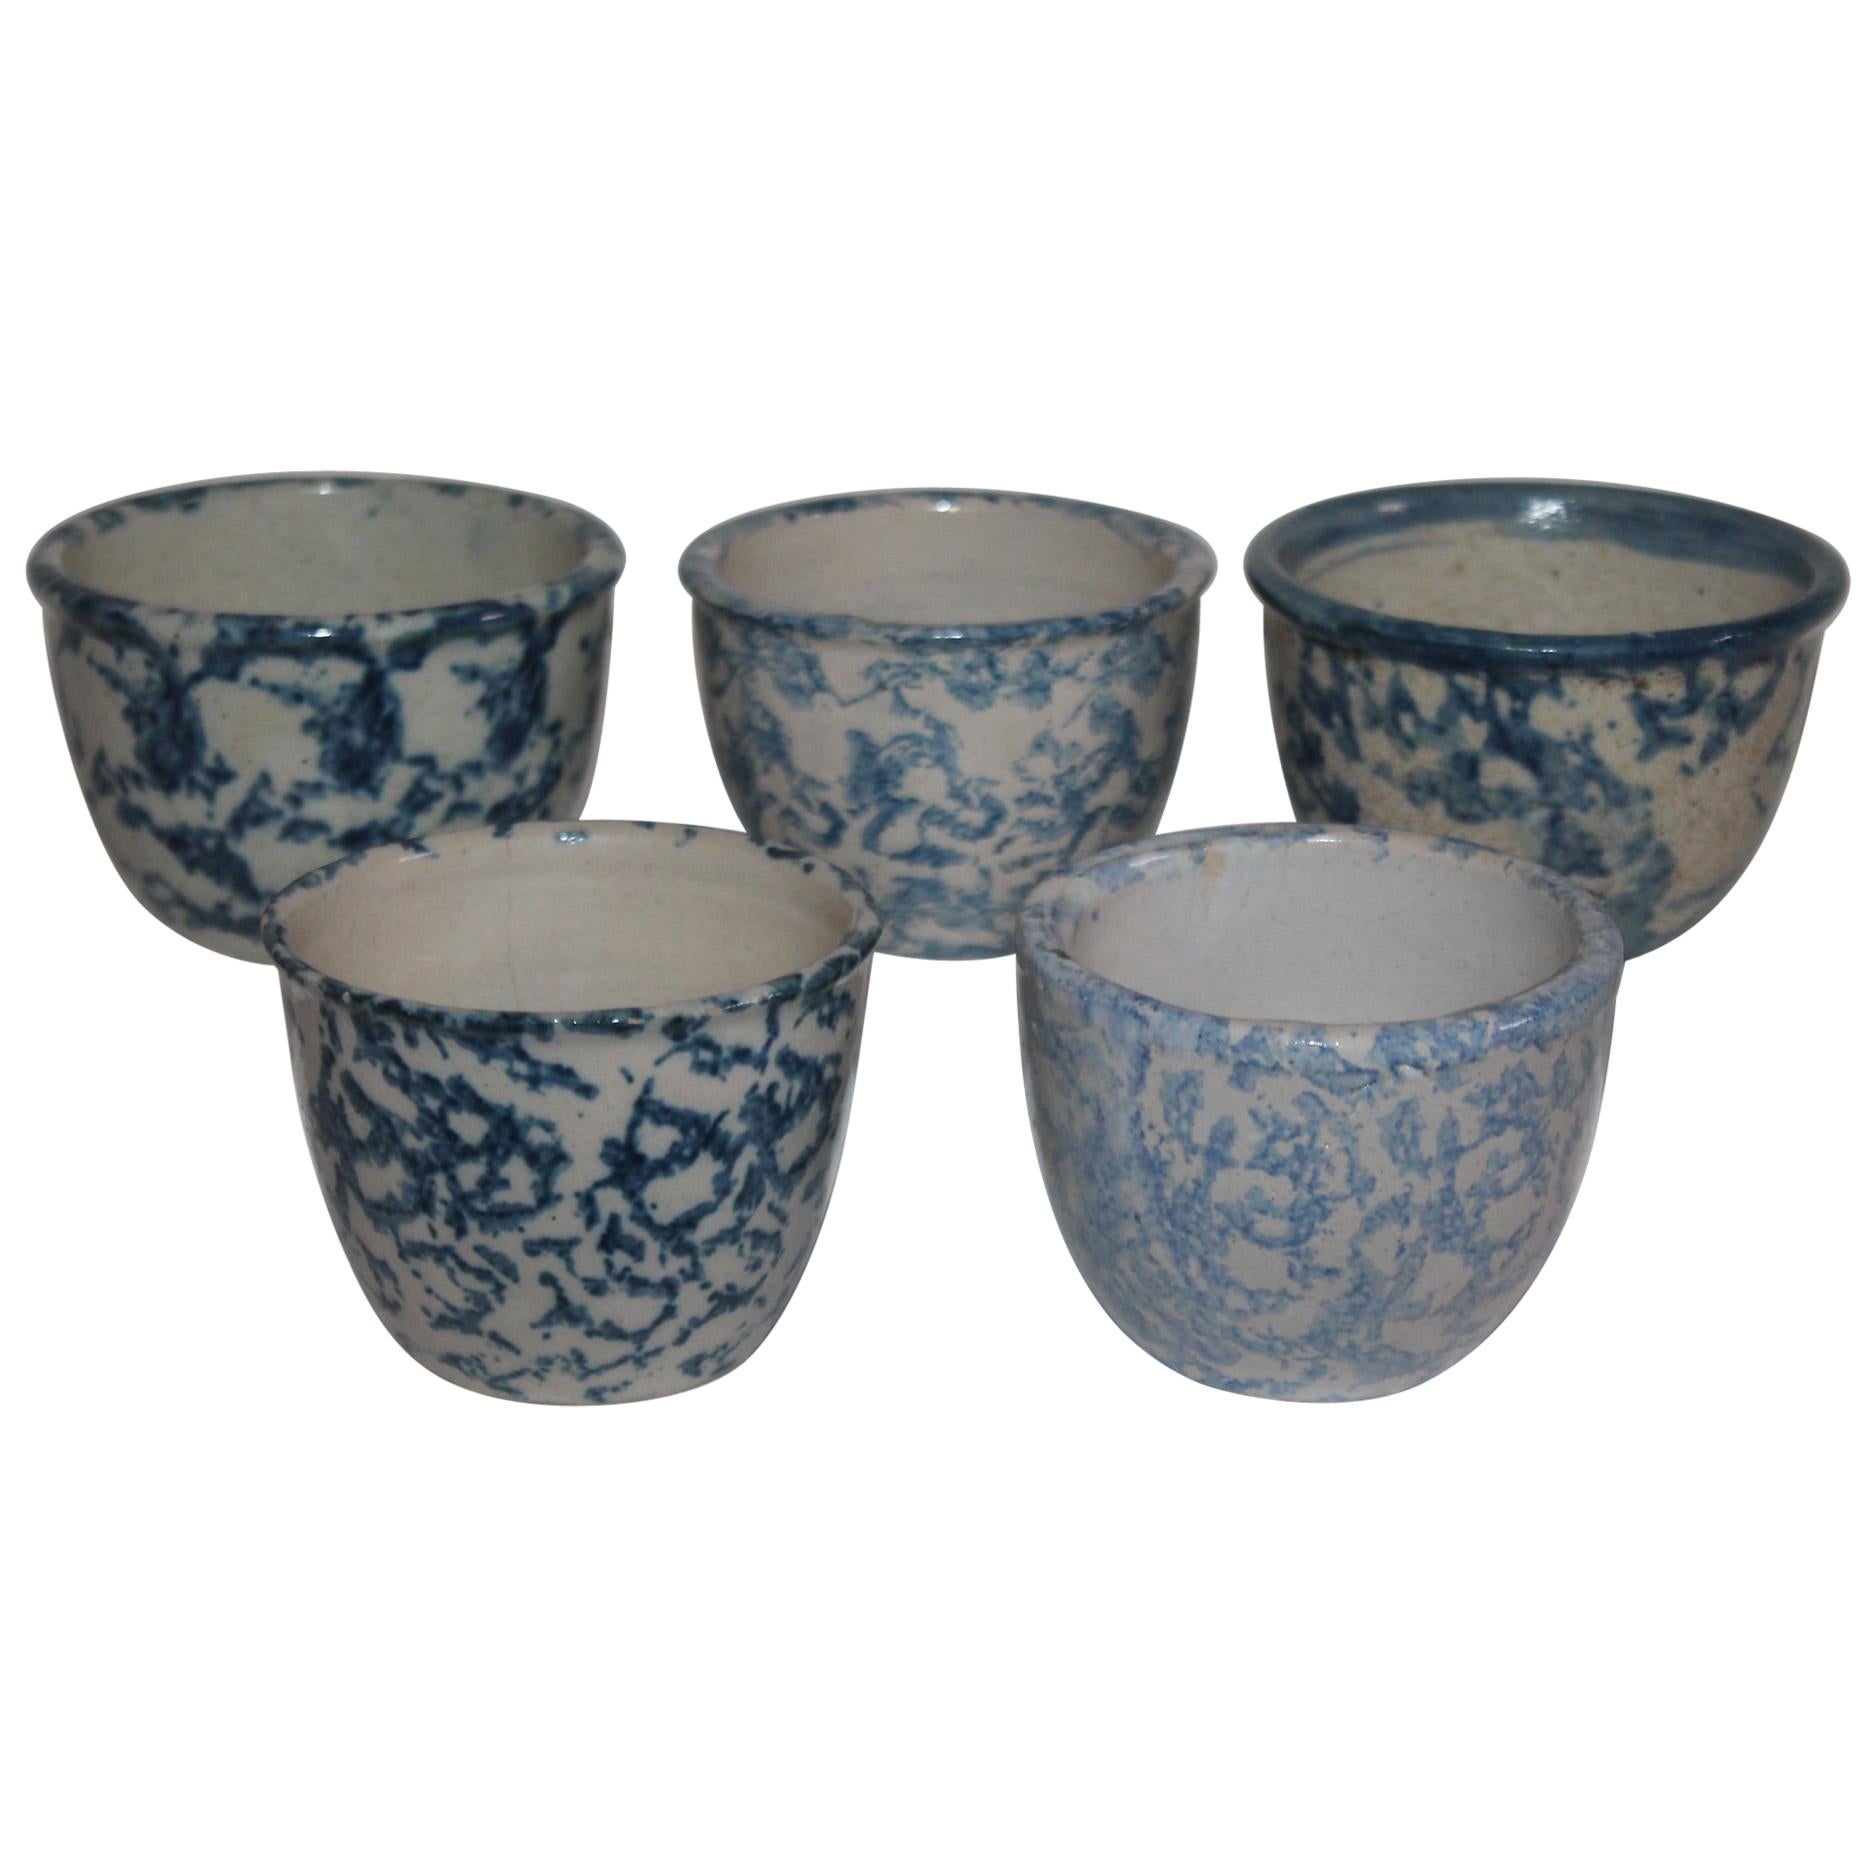 Collection of Five 19th Century Sponge Ware Custard Cups